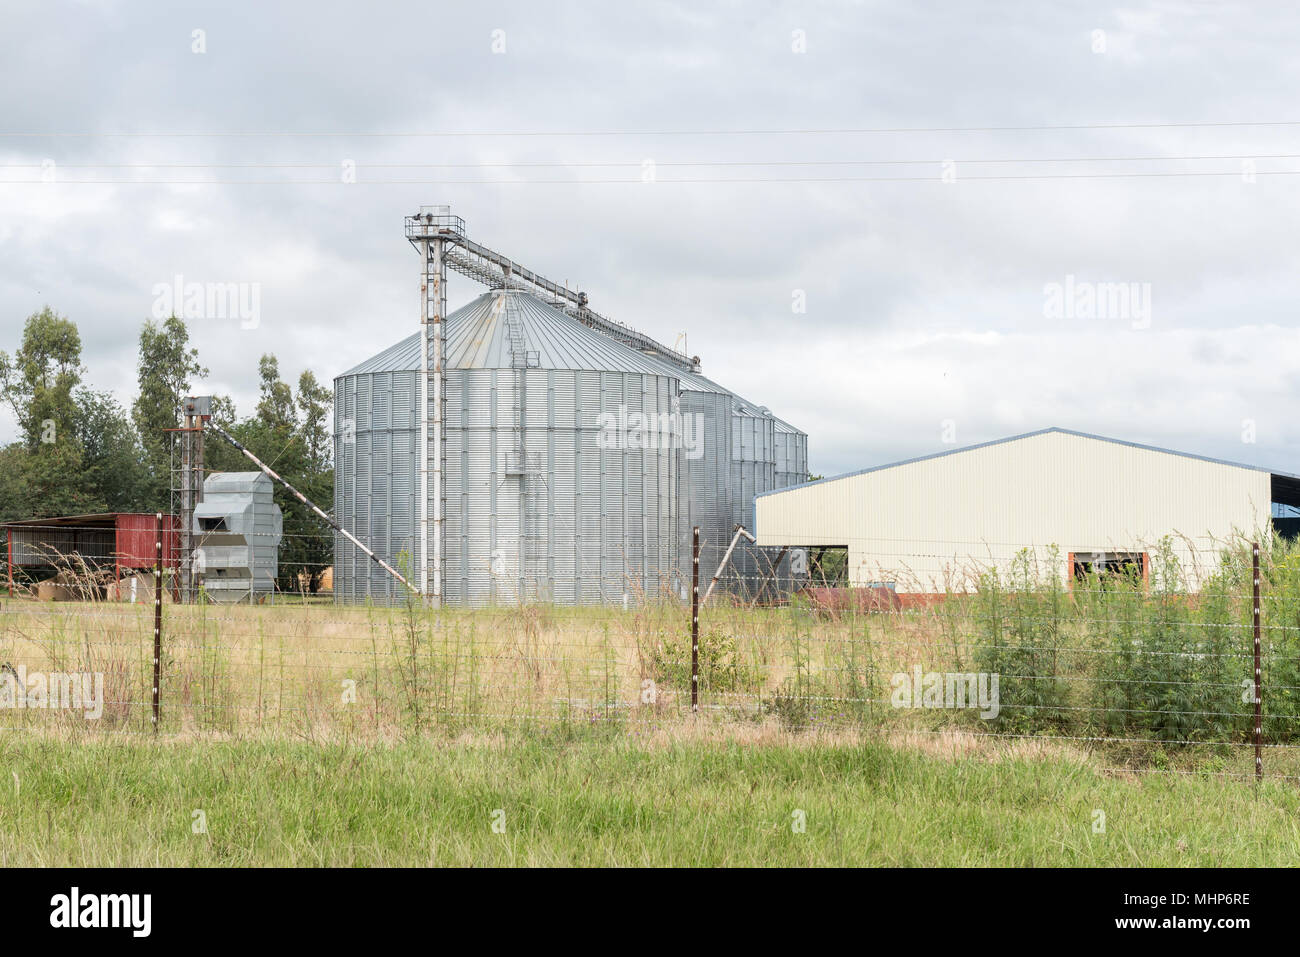 BERGVILLE, SOUTH AFRICA - MARCH 18, 2018: Grain silos in Bergville in the Kwazulu-Natal Province Stock Photo